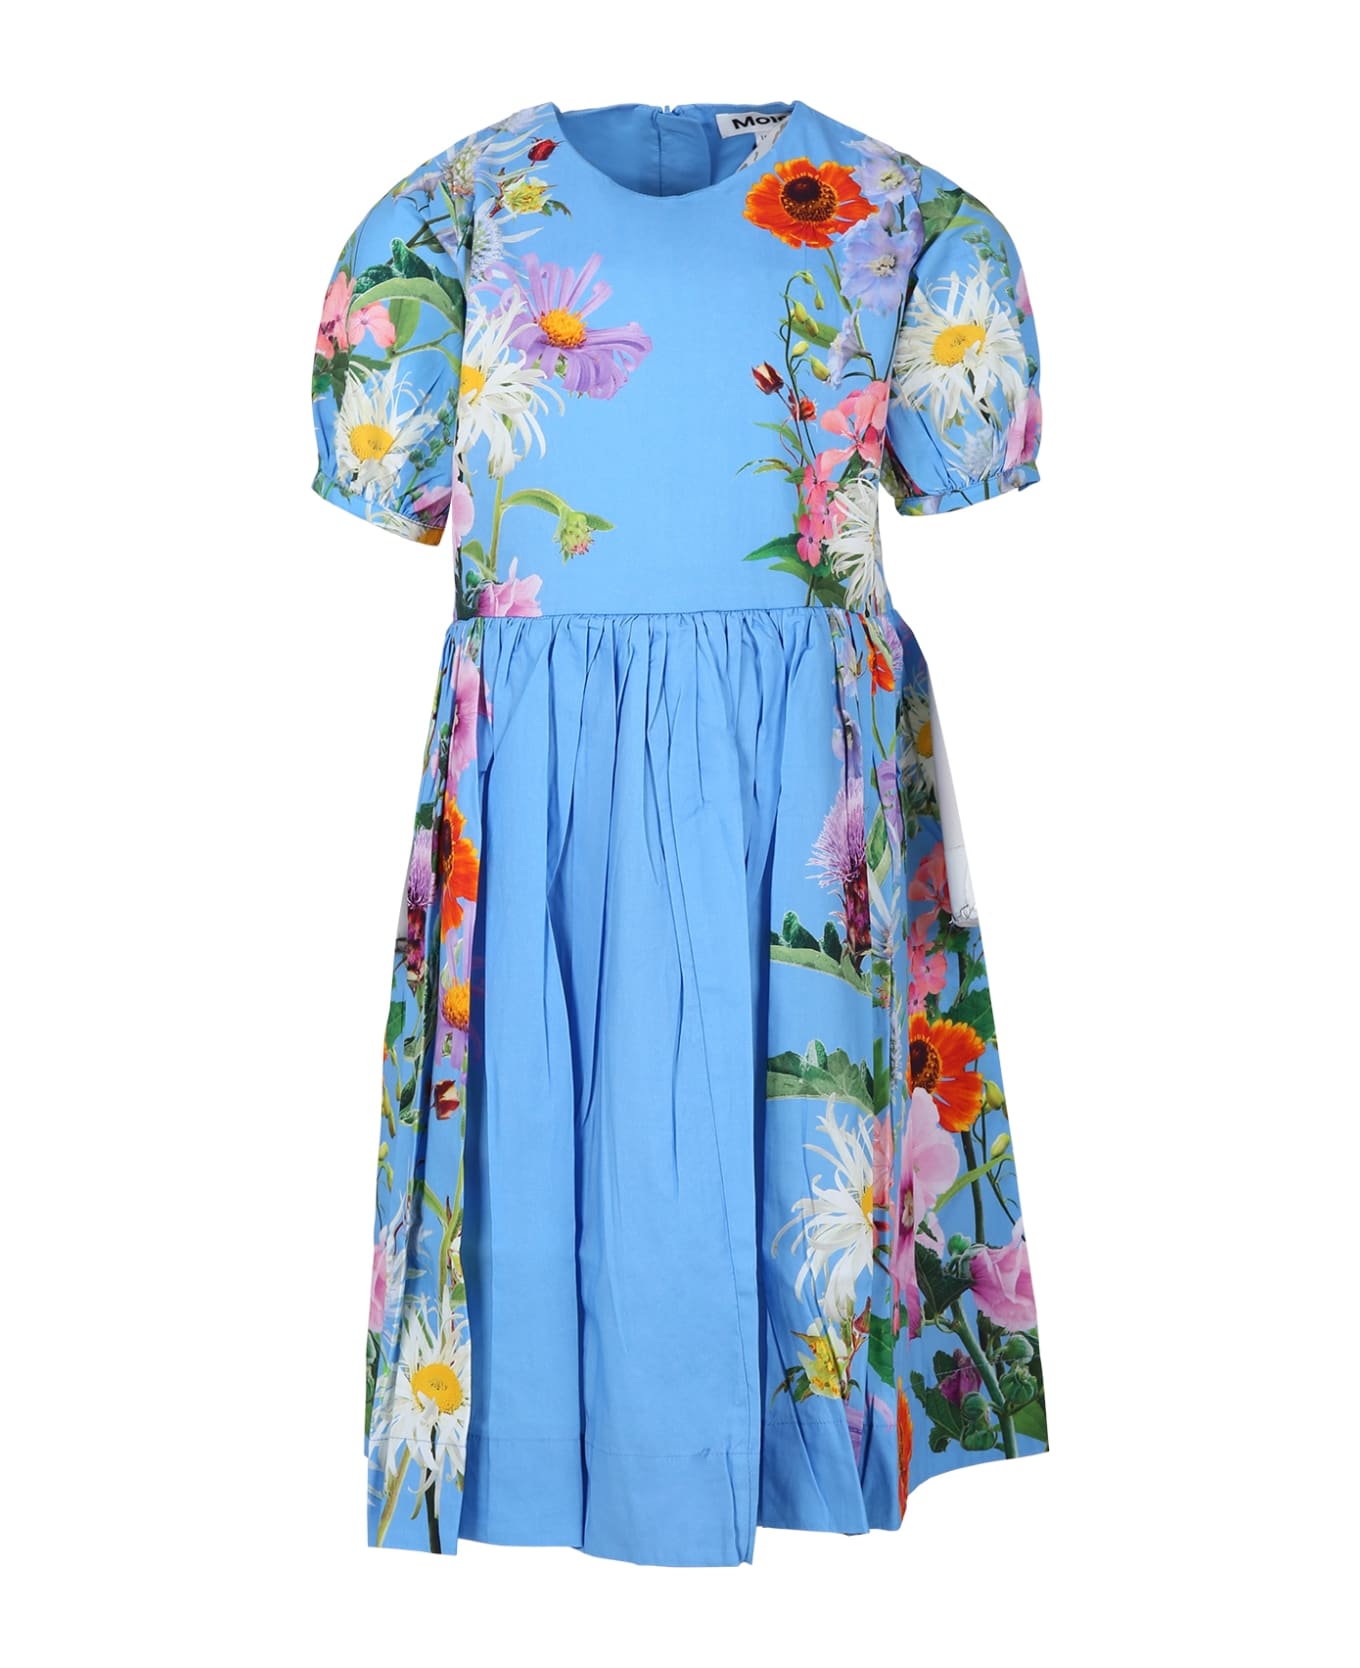 Molo Light Blue Casual Casey Dress For Girl With A Floral Pattern - Light Blue